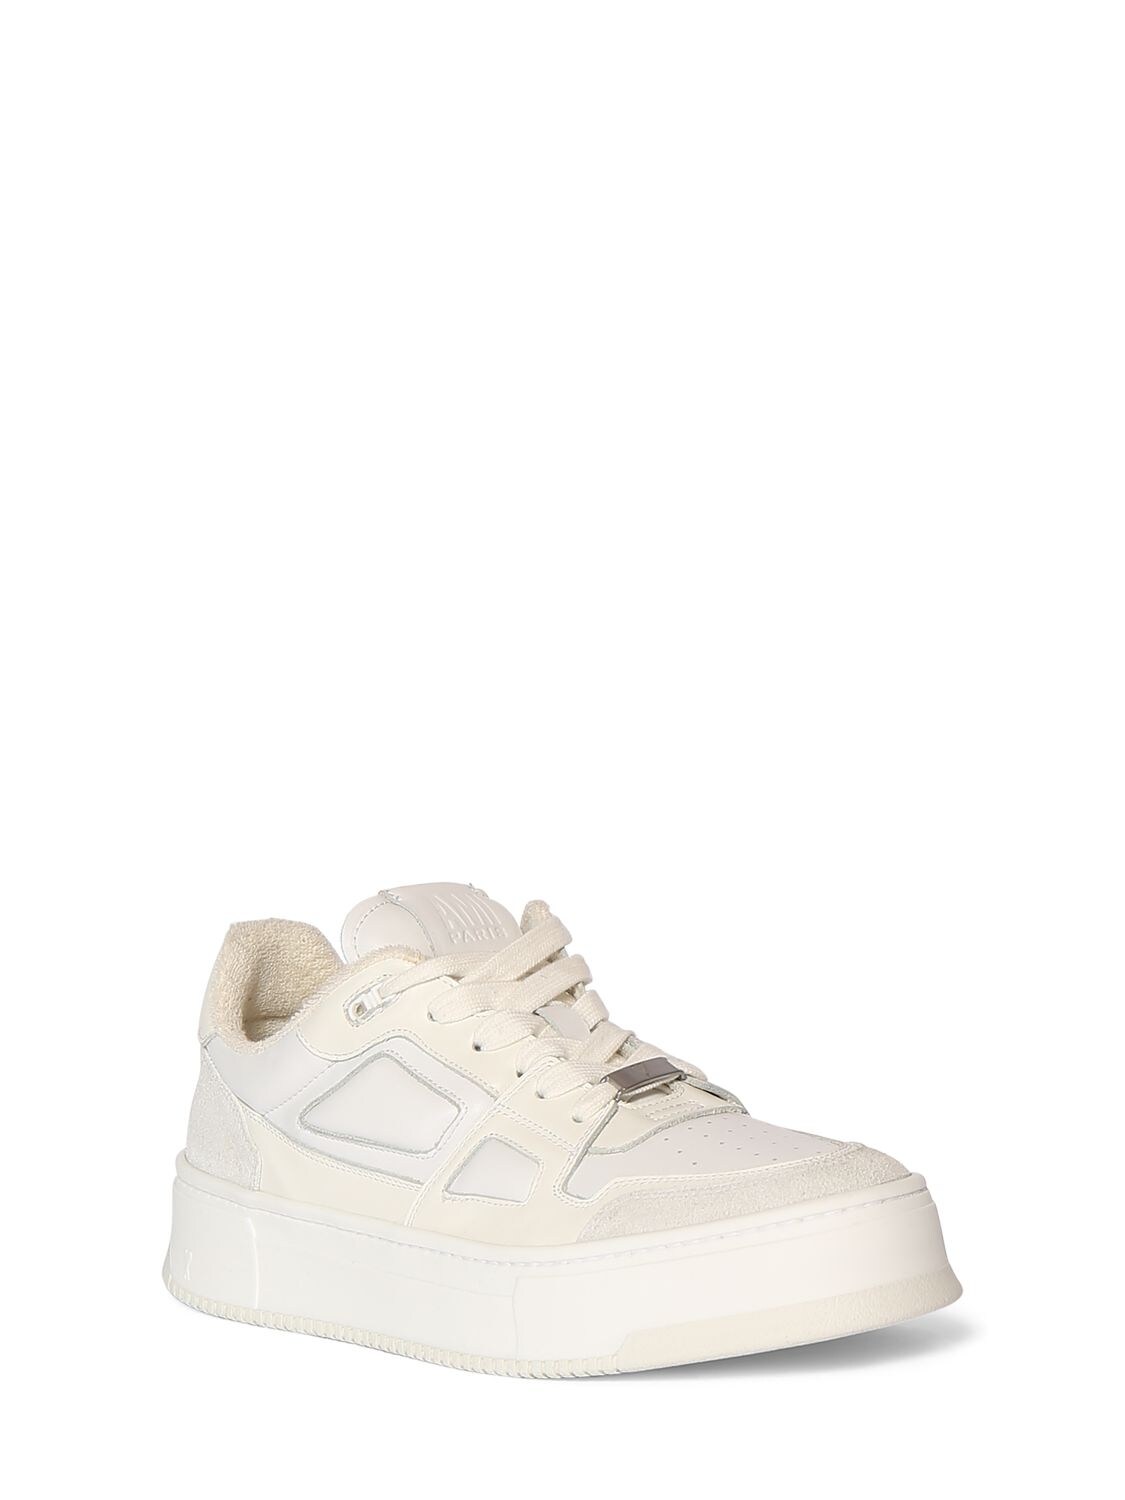 Shop Ami Alexandre Mattiussi New Arcade Low Top Sneakers In Off White